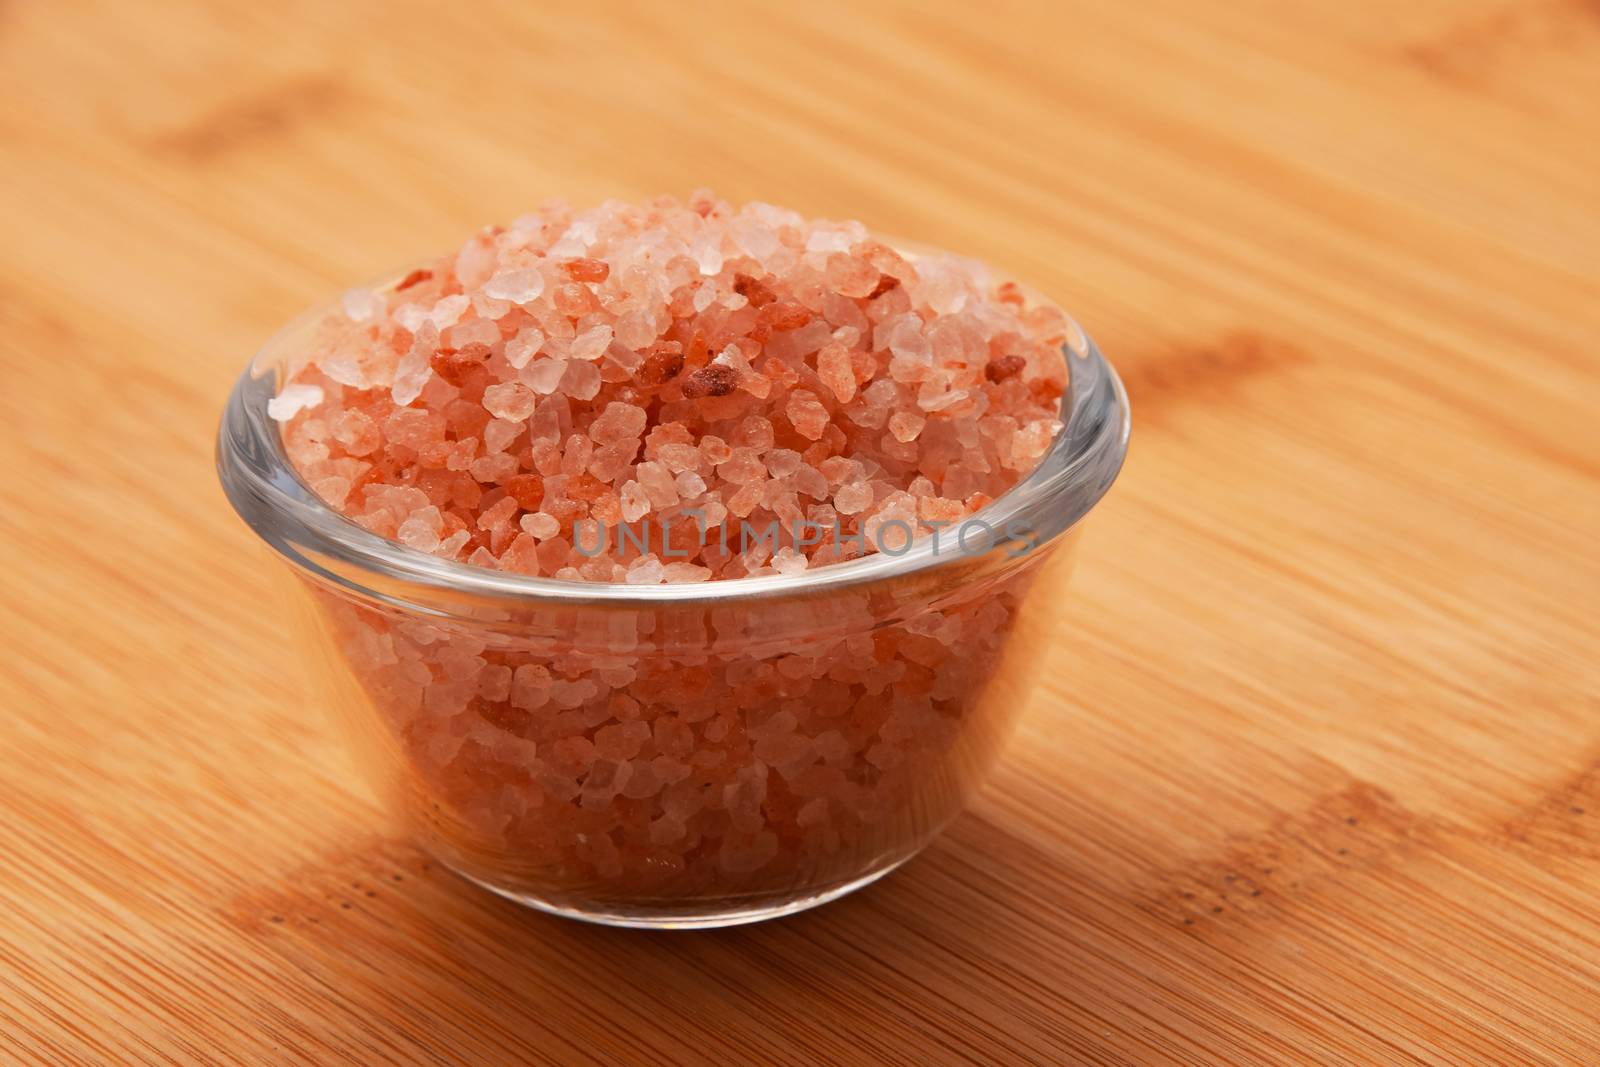 Himalayan pink salt in tiny transparent glass bowl on wooden bamboo background